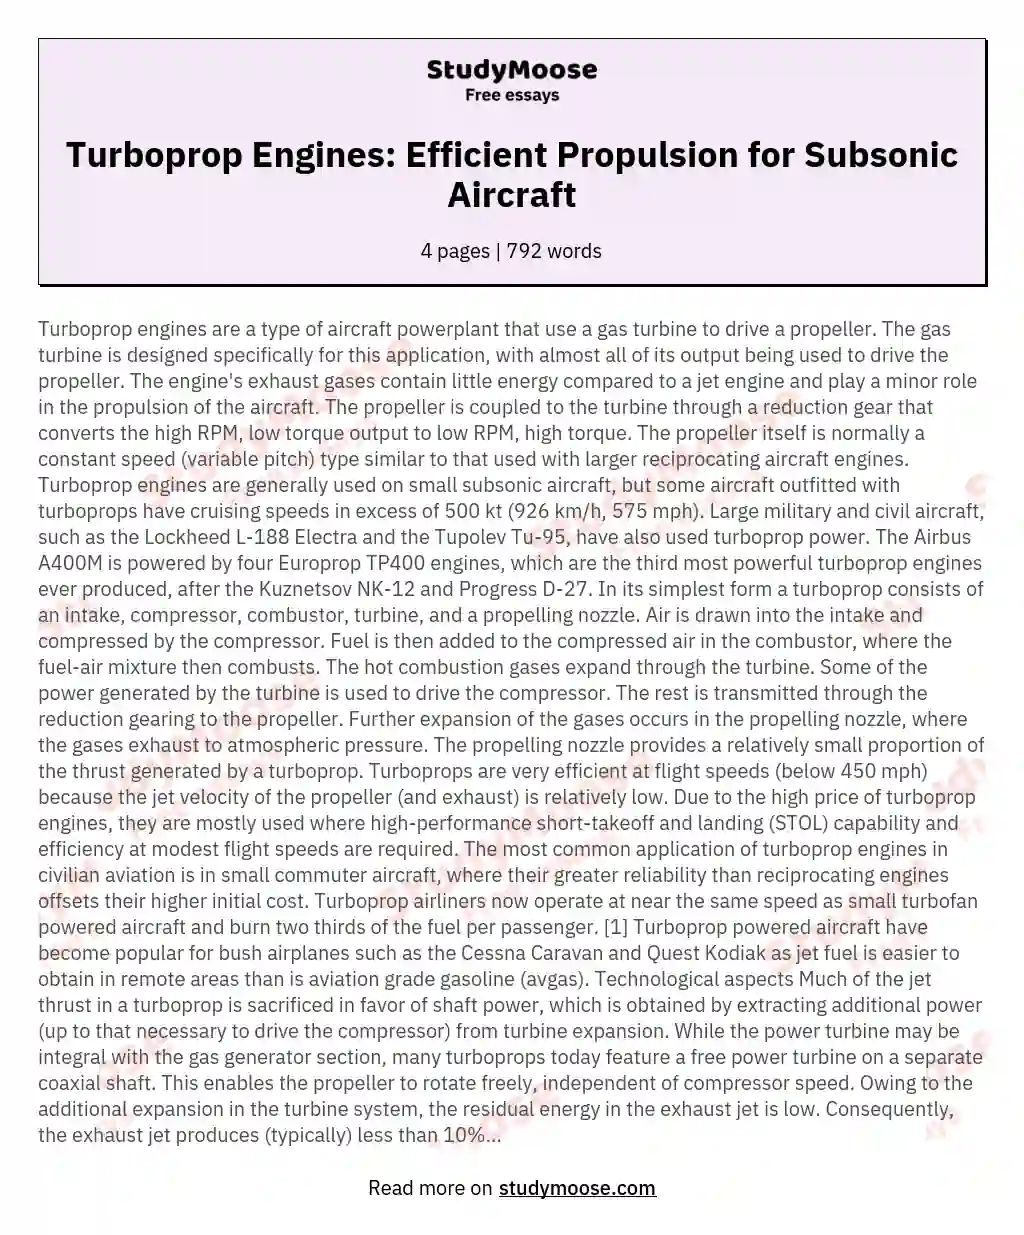 Turboprop Engines: Efficient Propulsion for Subsonic Aircraft essay